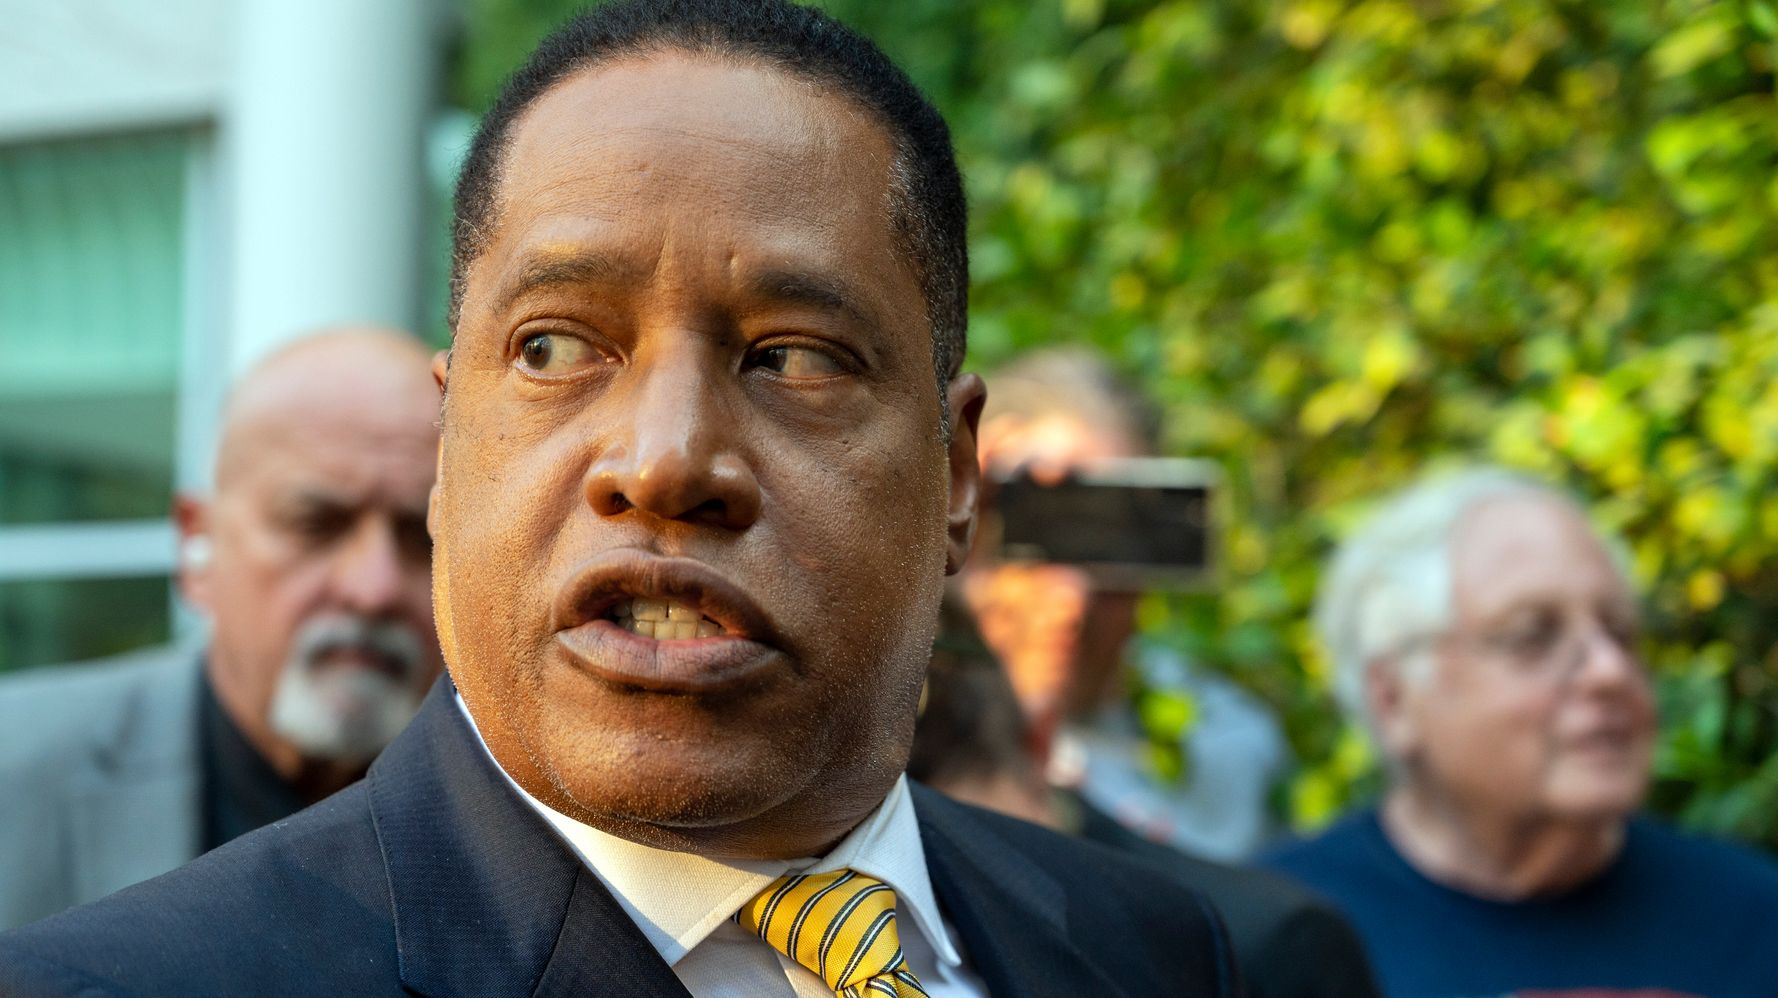 California GOP Recall Candidate Larry Elder Wanted To End Medicaid